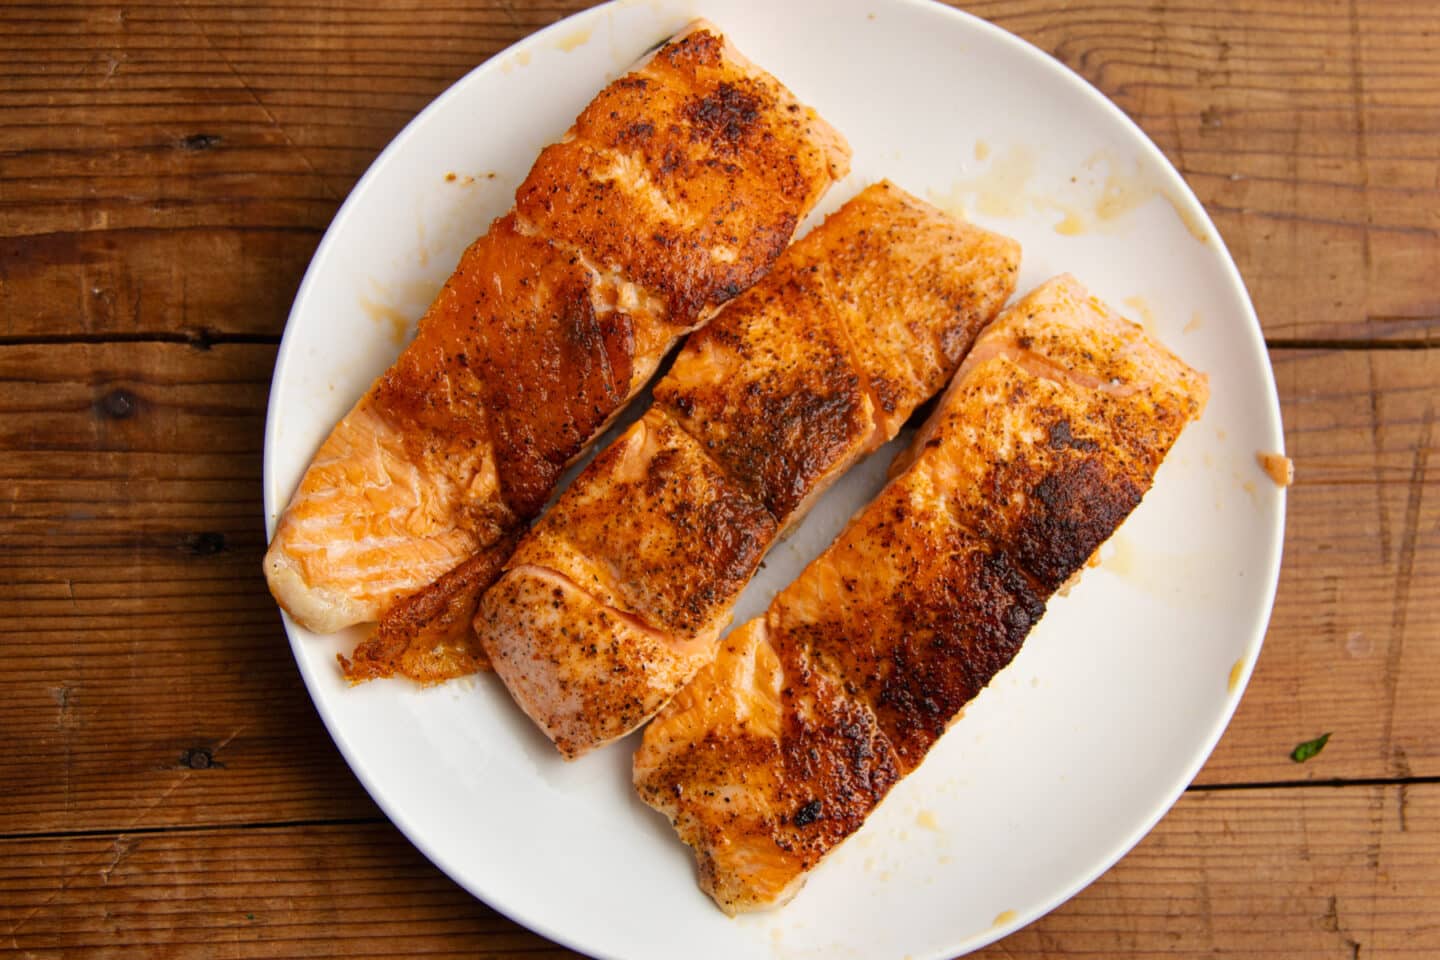 This is a picture of the cooked salmon filets on a plate.